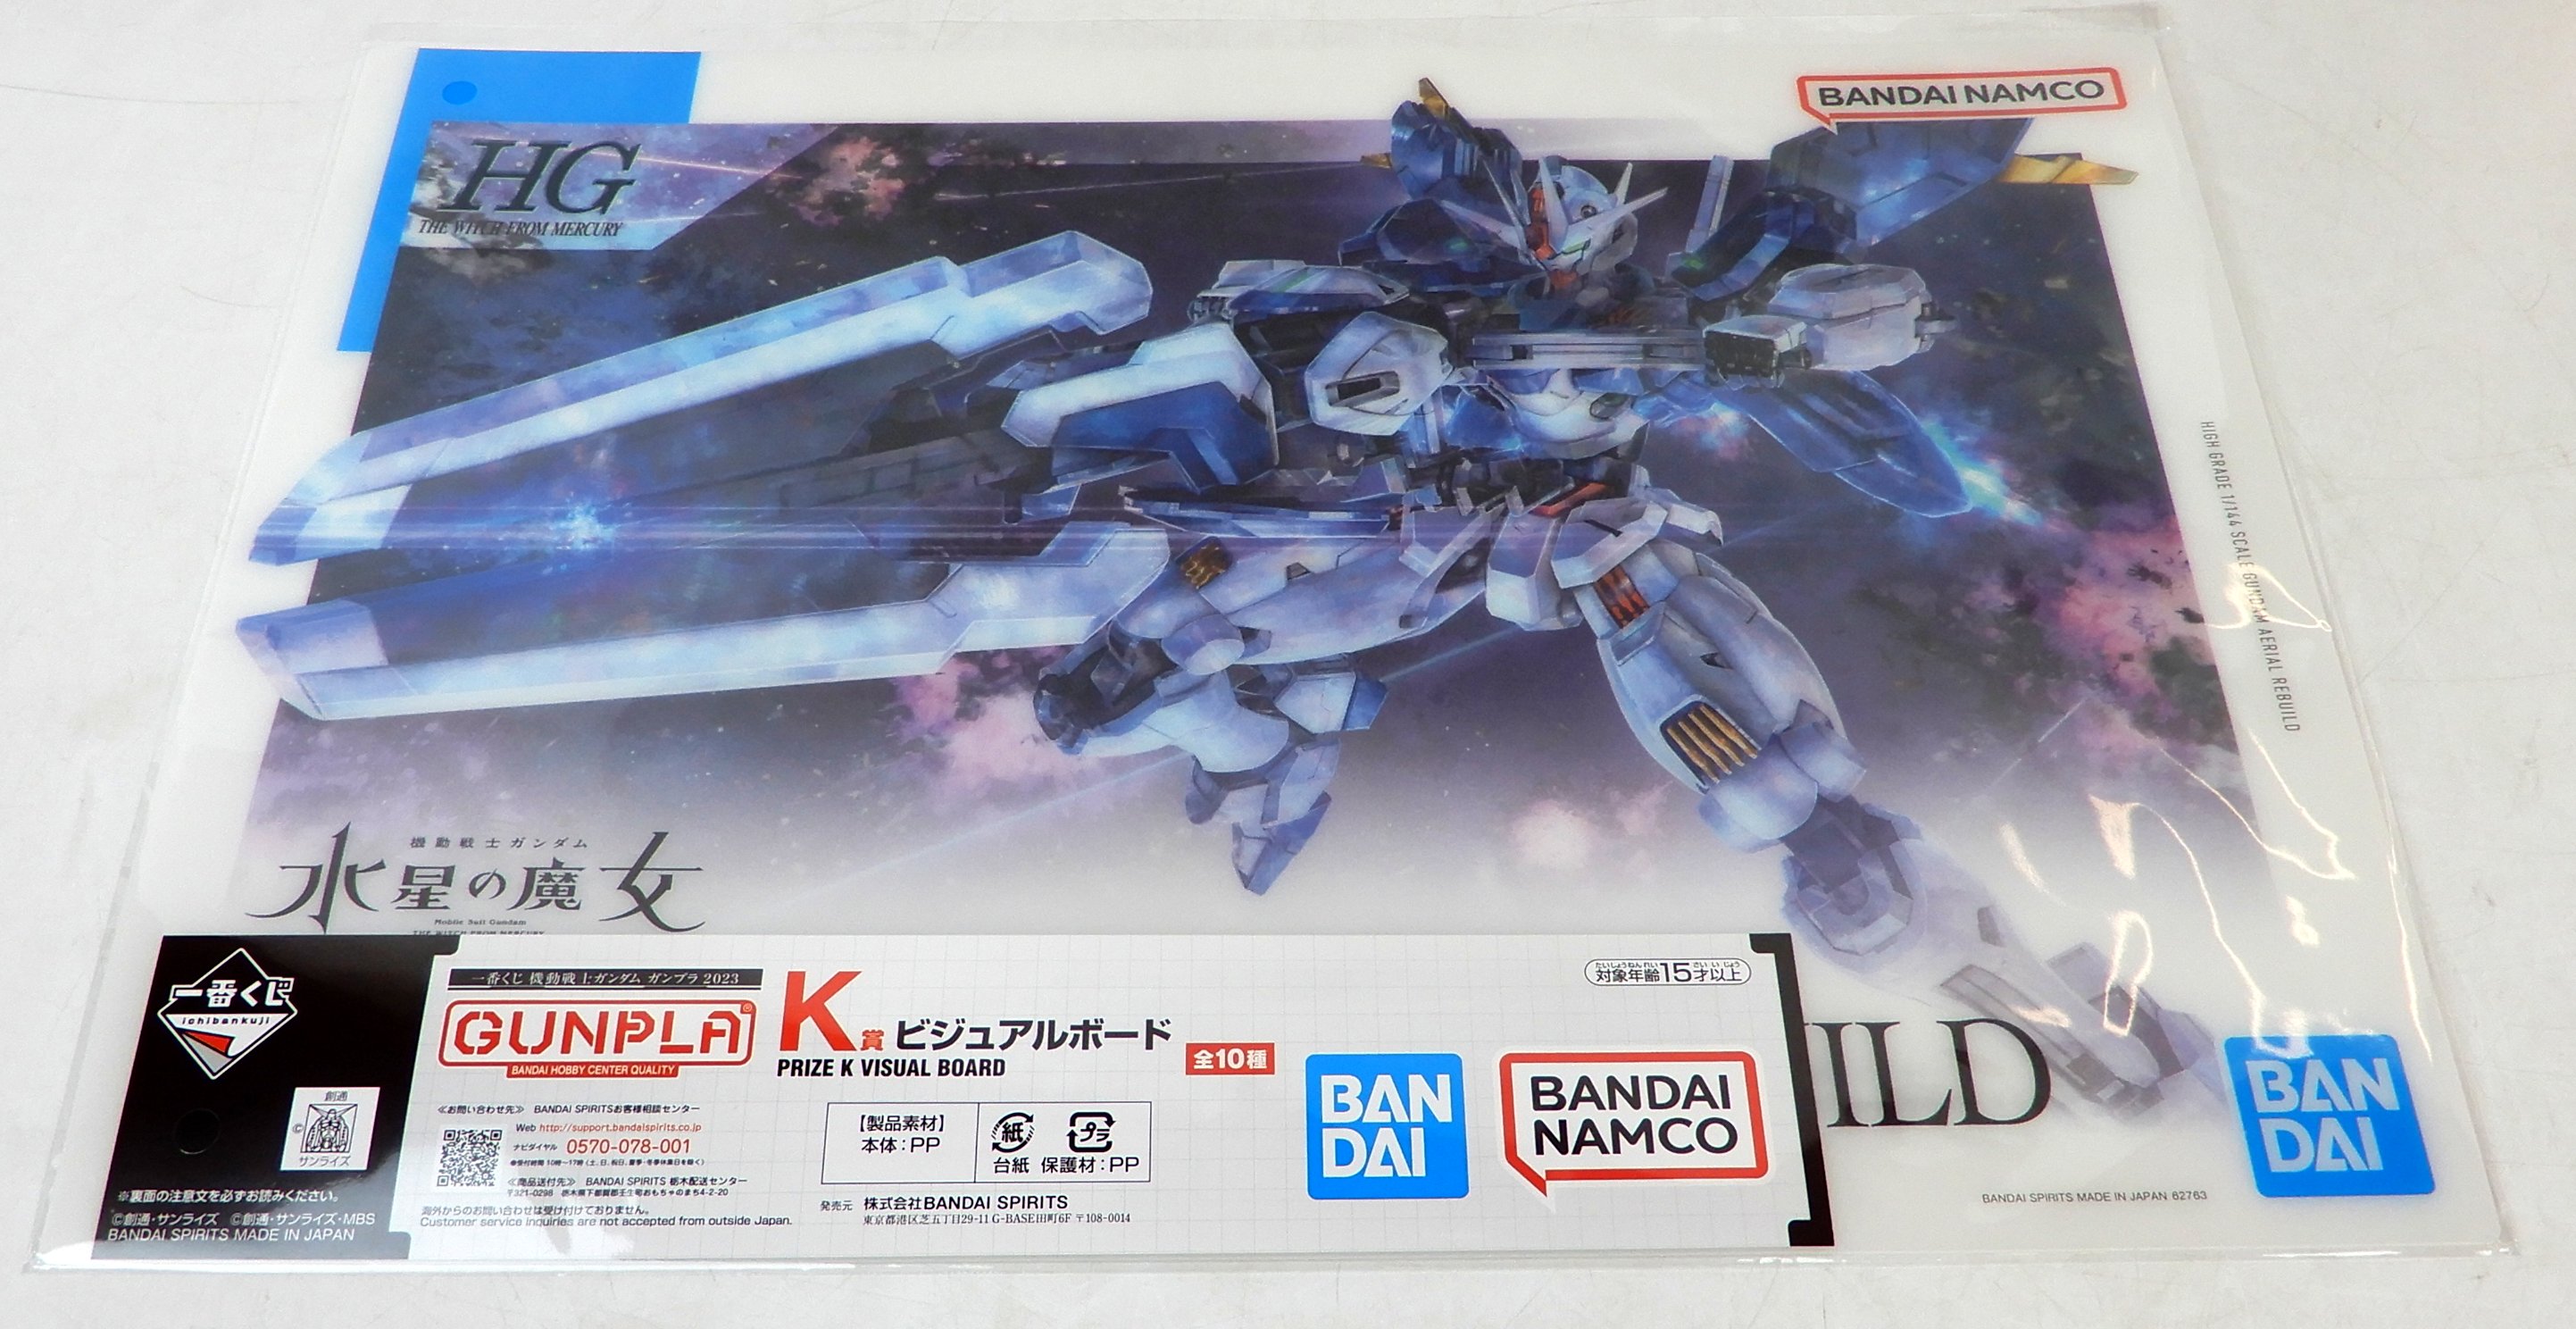 PRE-ORDER: May 2023) Bandai Hobby The Witch From Mercury Gundam